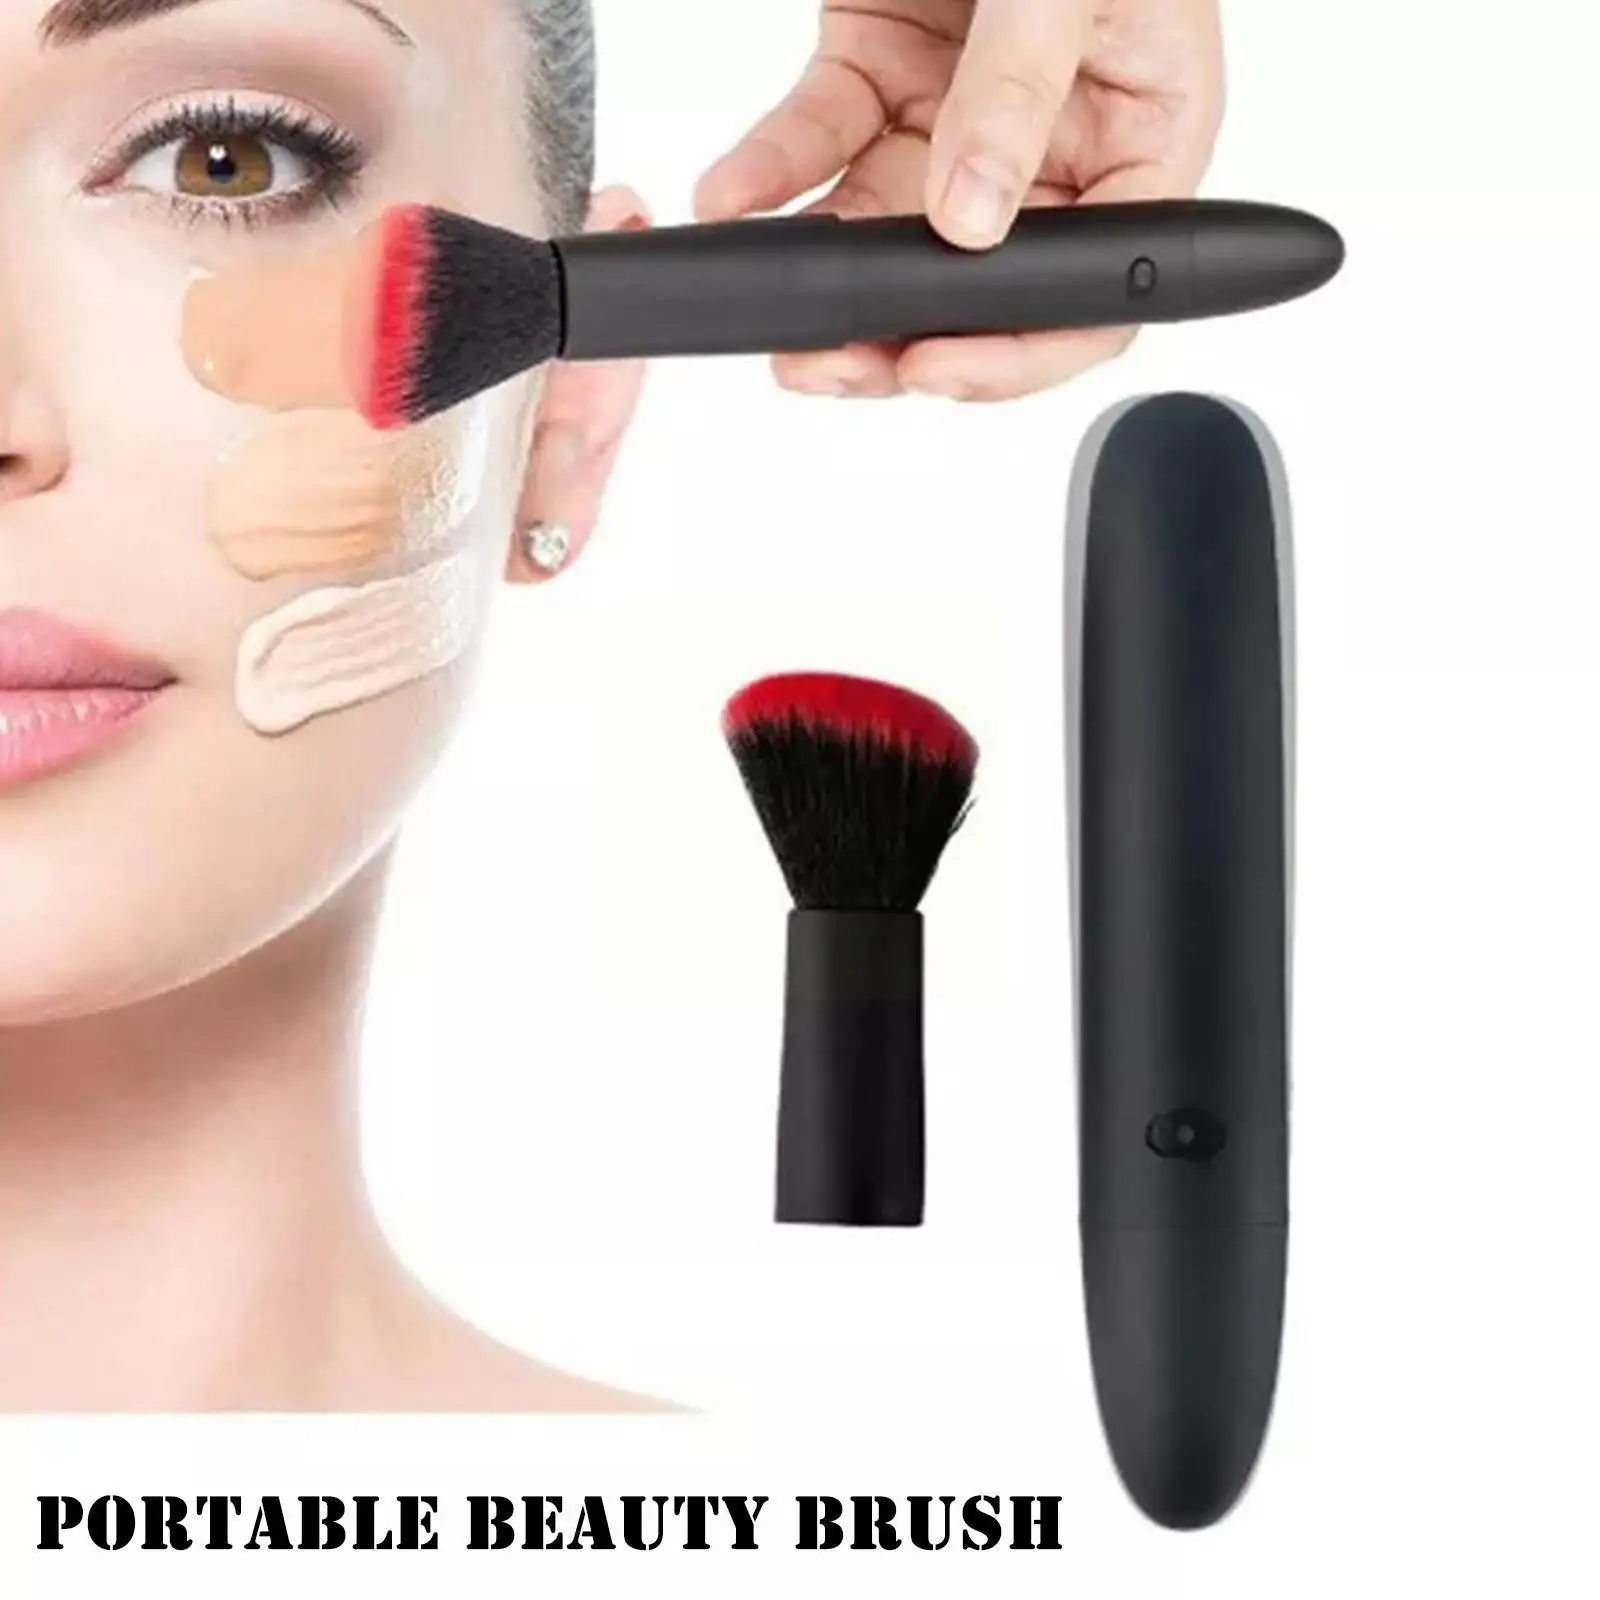 

1PCS Portable Beauty Brush USB Charge Electric Makeup Blending Brush Tools Cosmetics Tool Black Concealer Foundation Q0A6